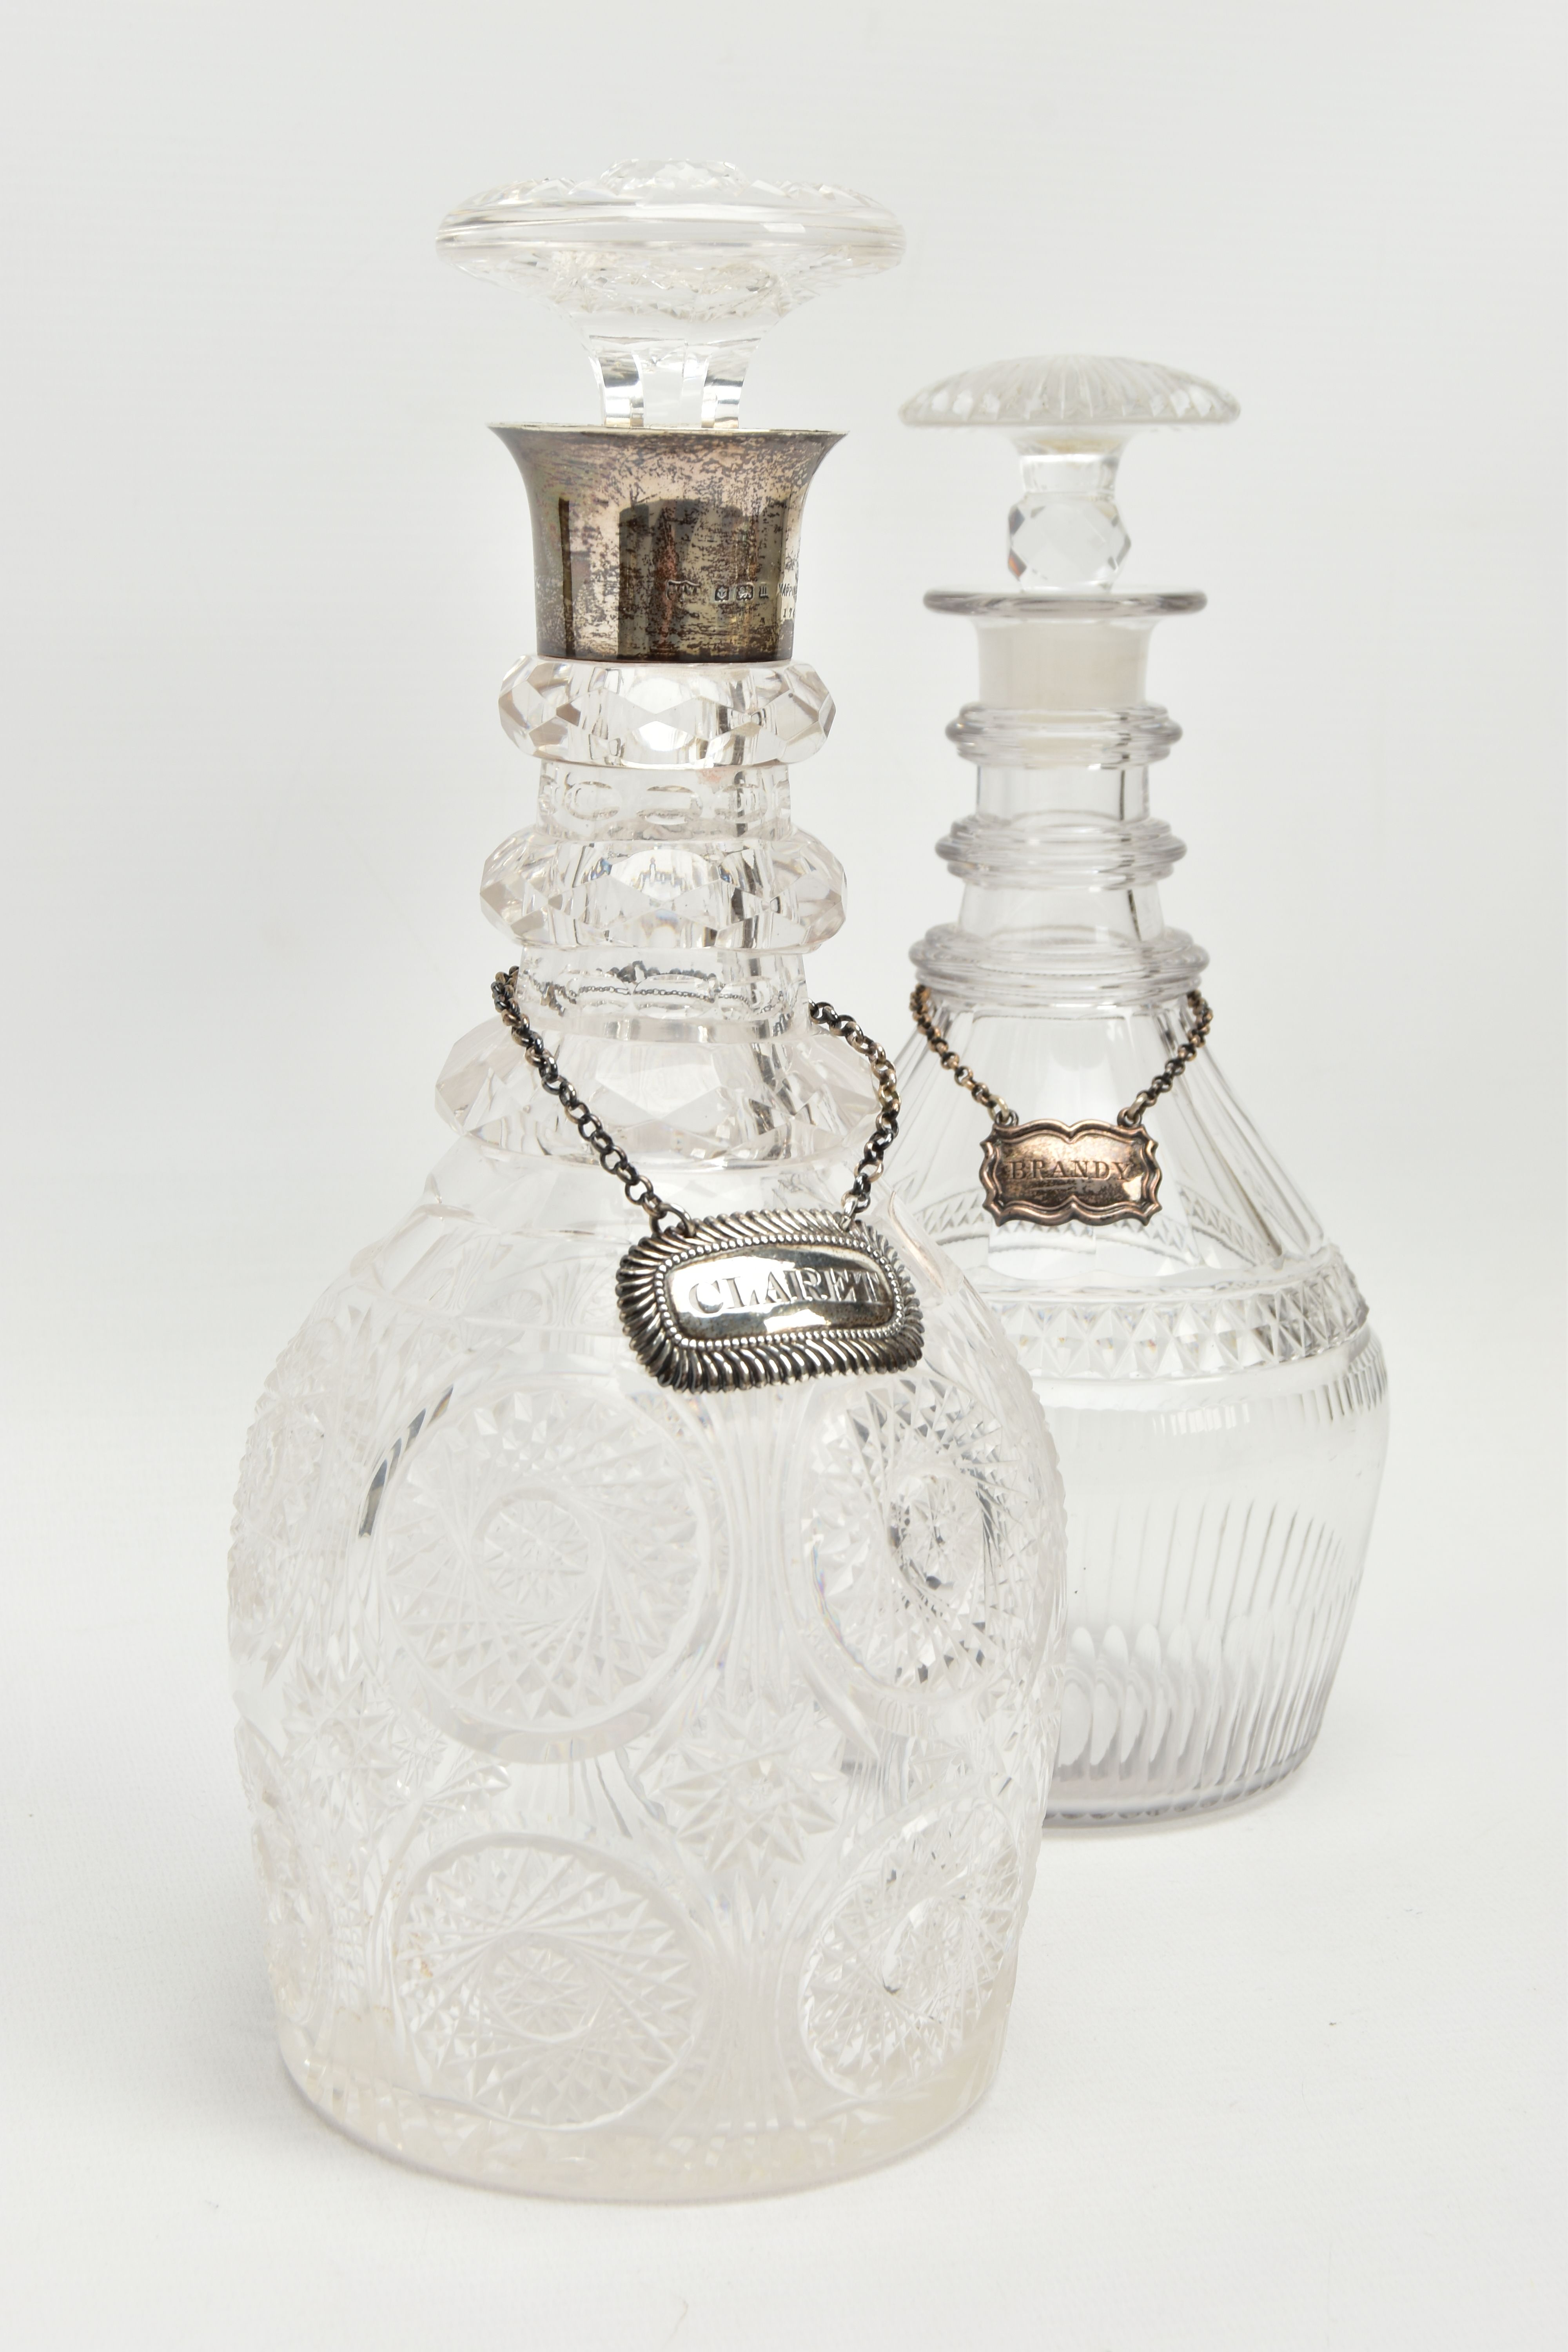 AN EARLY 19TH CENTURY PRUSSIAN SHAPED GLASS DECANTER AND A GEORGE V GLASS DECANTER, the early 19th - Image 2 of 15